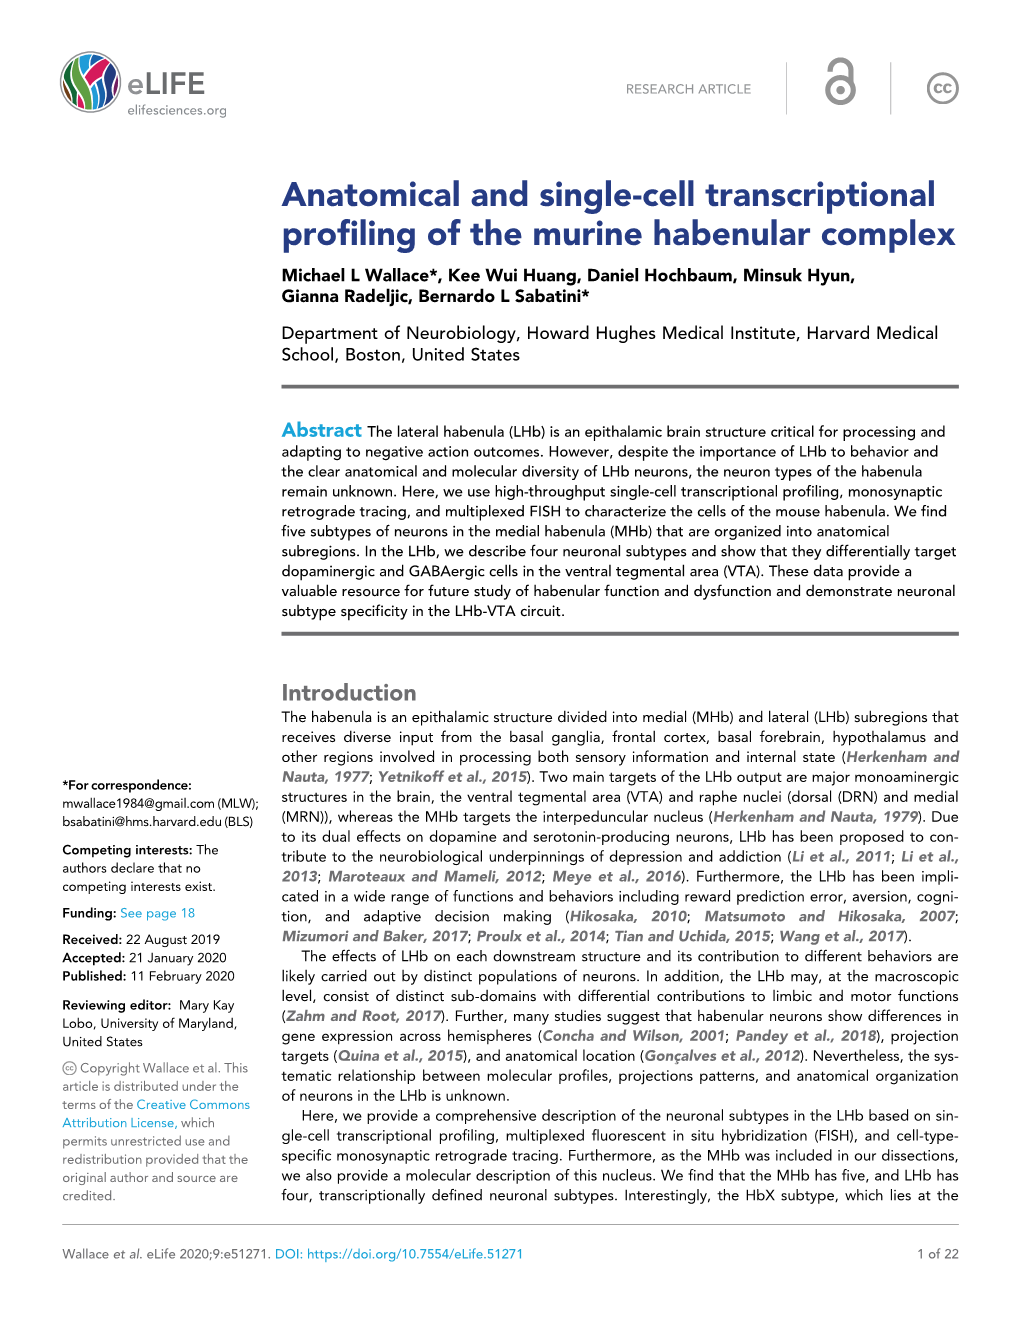 Anatomical and Single-Cell Transcriptional Profiling of The